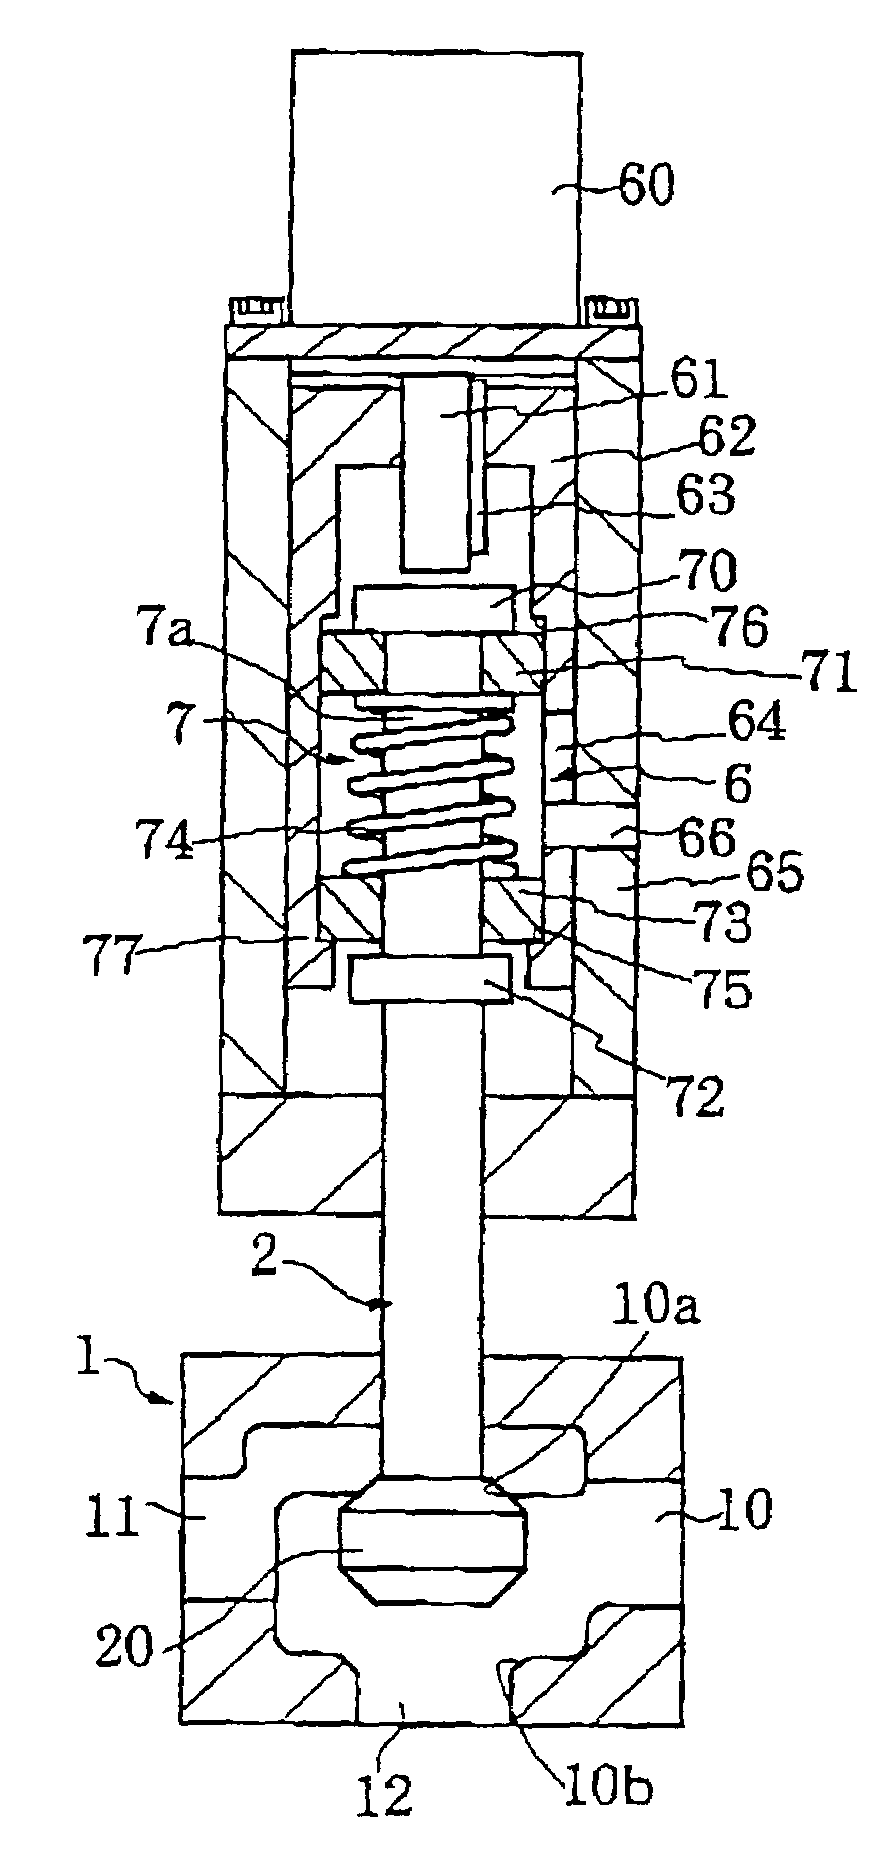 Direct-acting electric operated valve